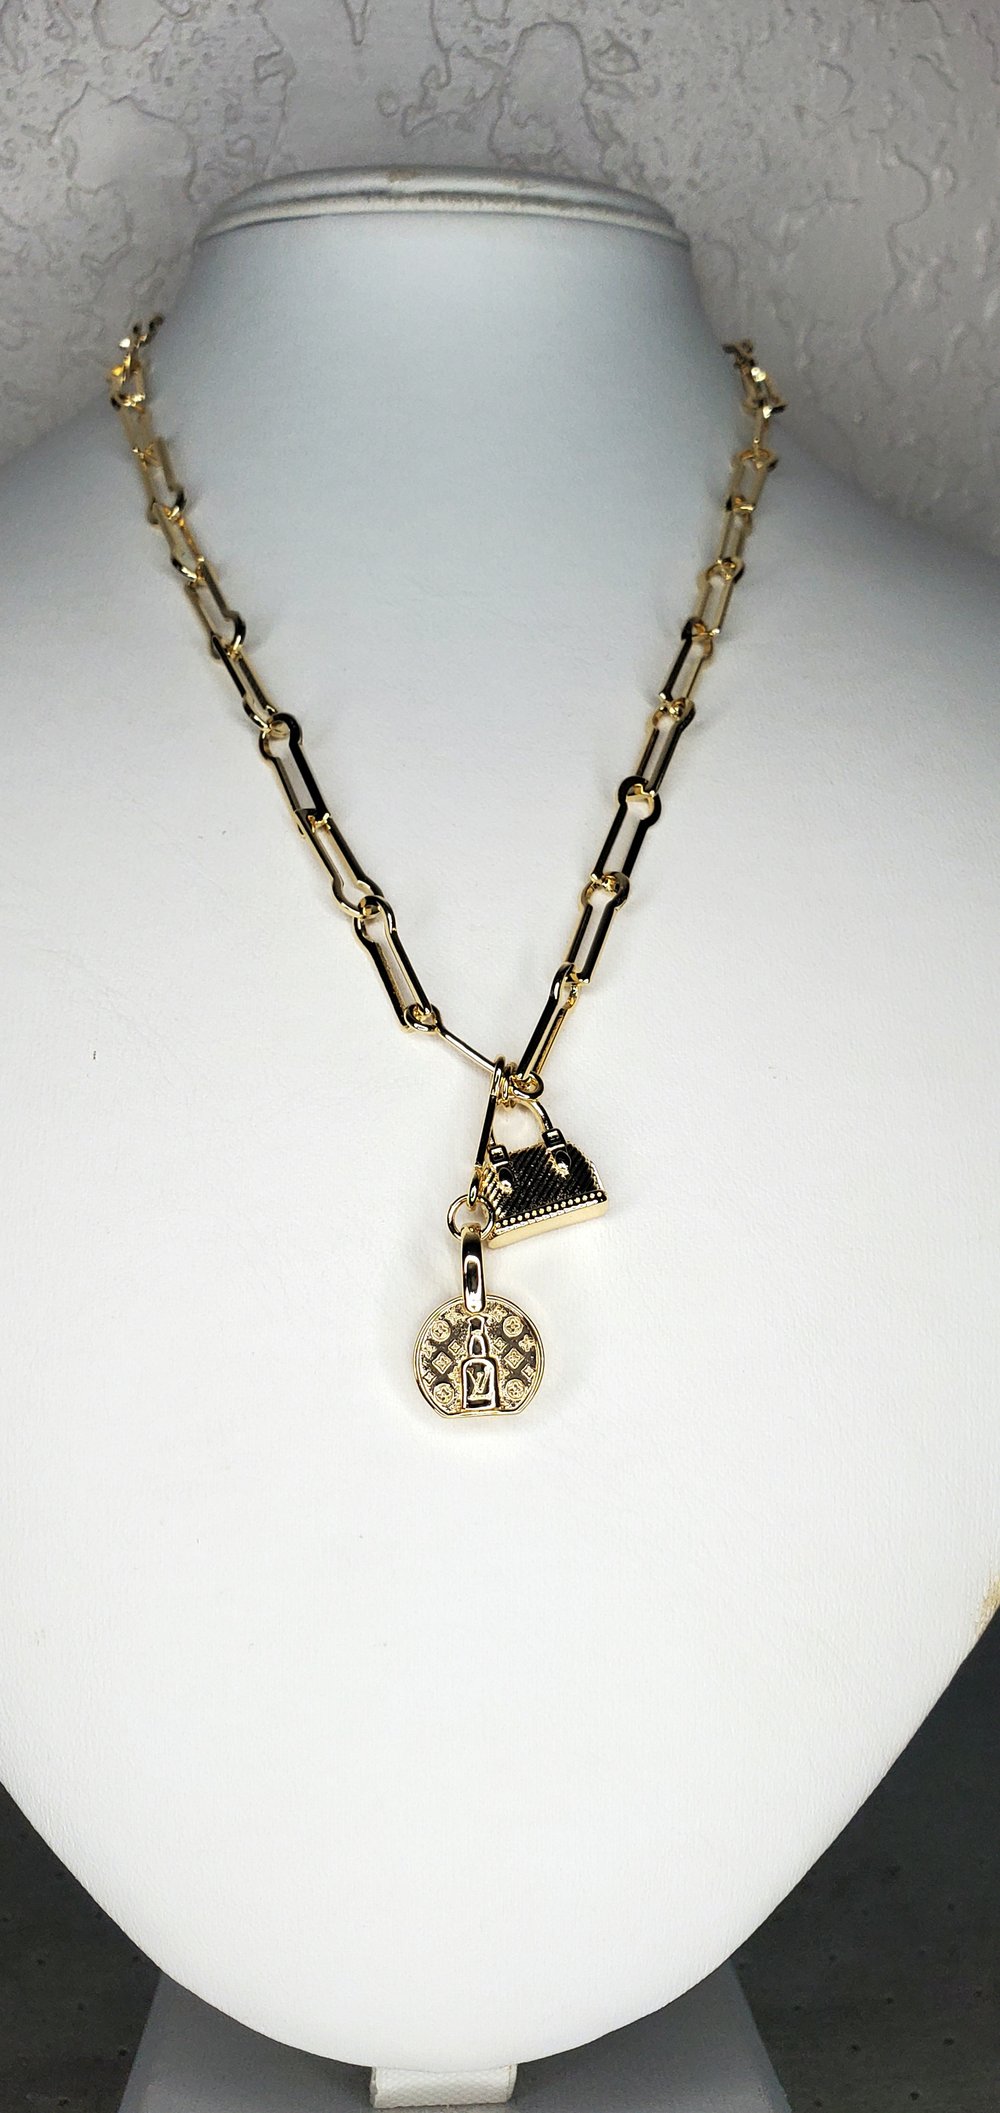 Image of LV Purse Charm Necklace